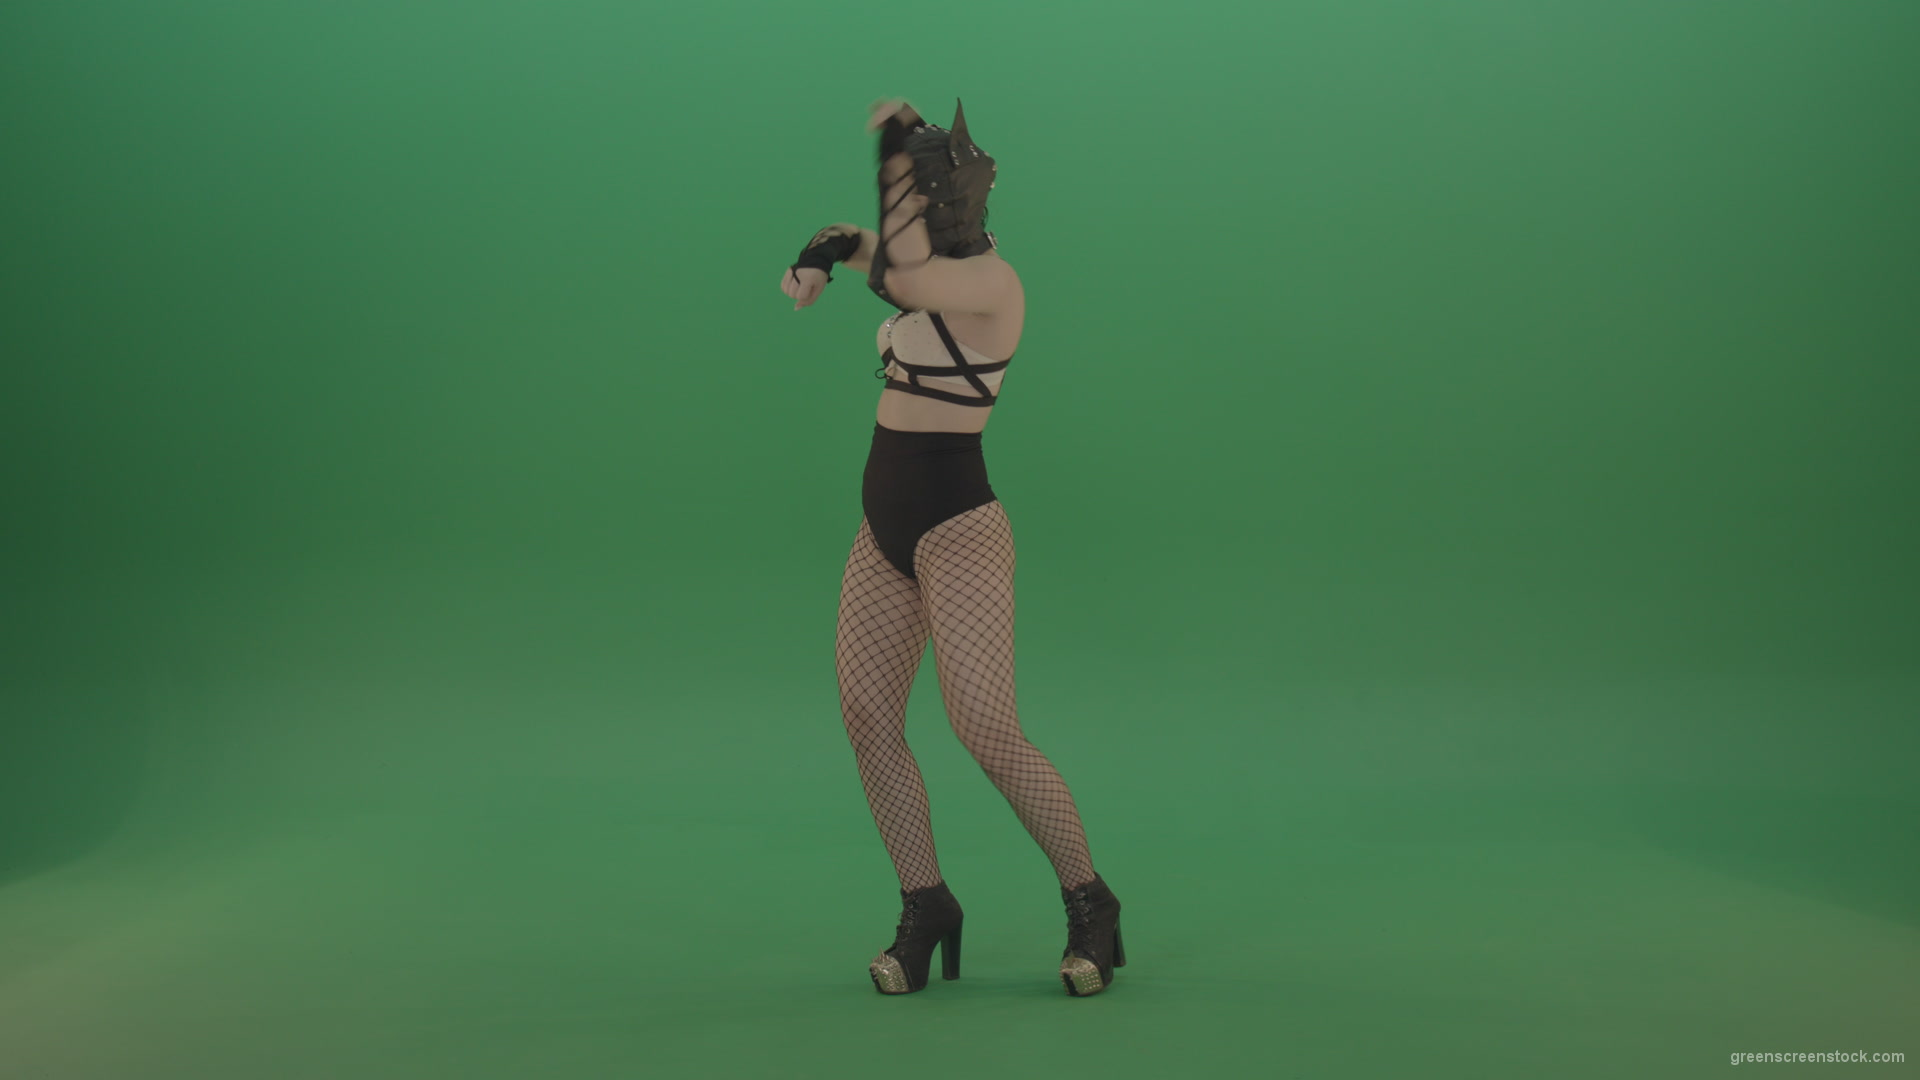 EDM-Girl-in-Wolf-Mask-making-fight-beats-on-green-screen_006 Green Screen Stock